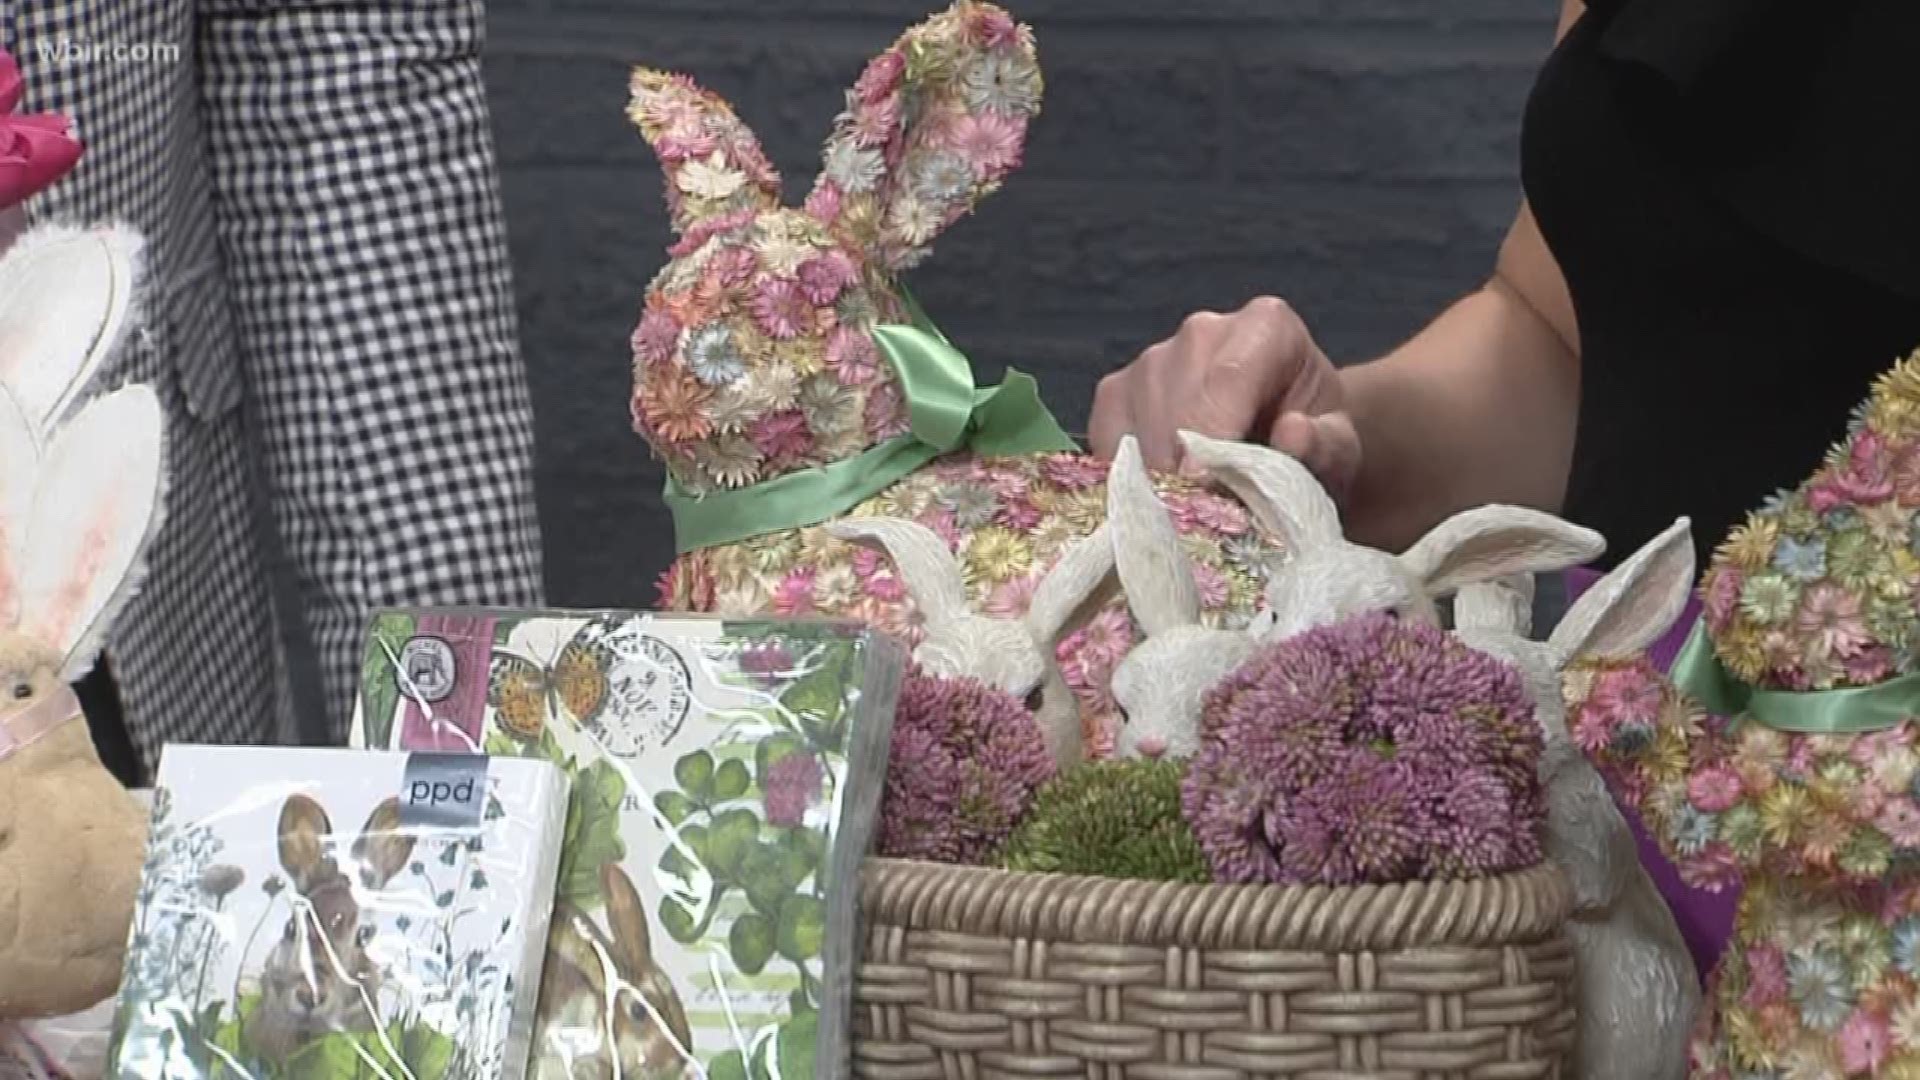 Interior Designer Todd Richesin shows us some creative tablescapes for spring and Easter.